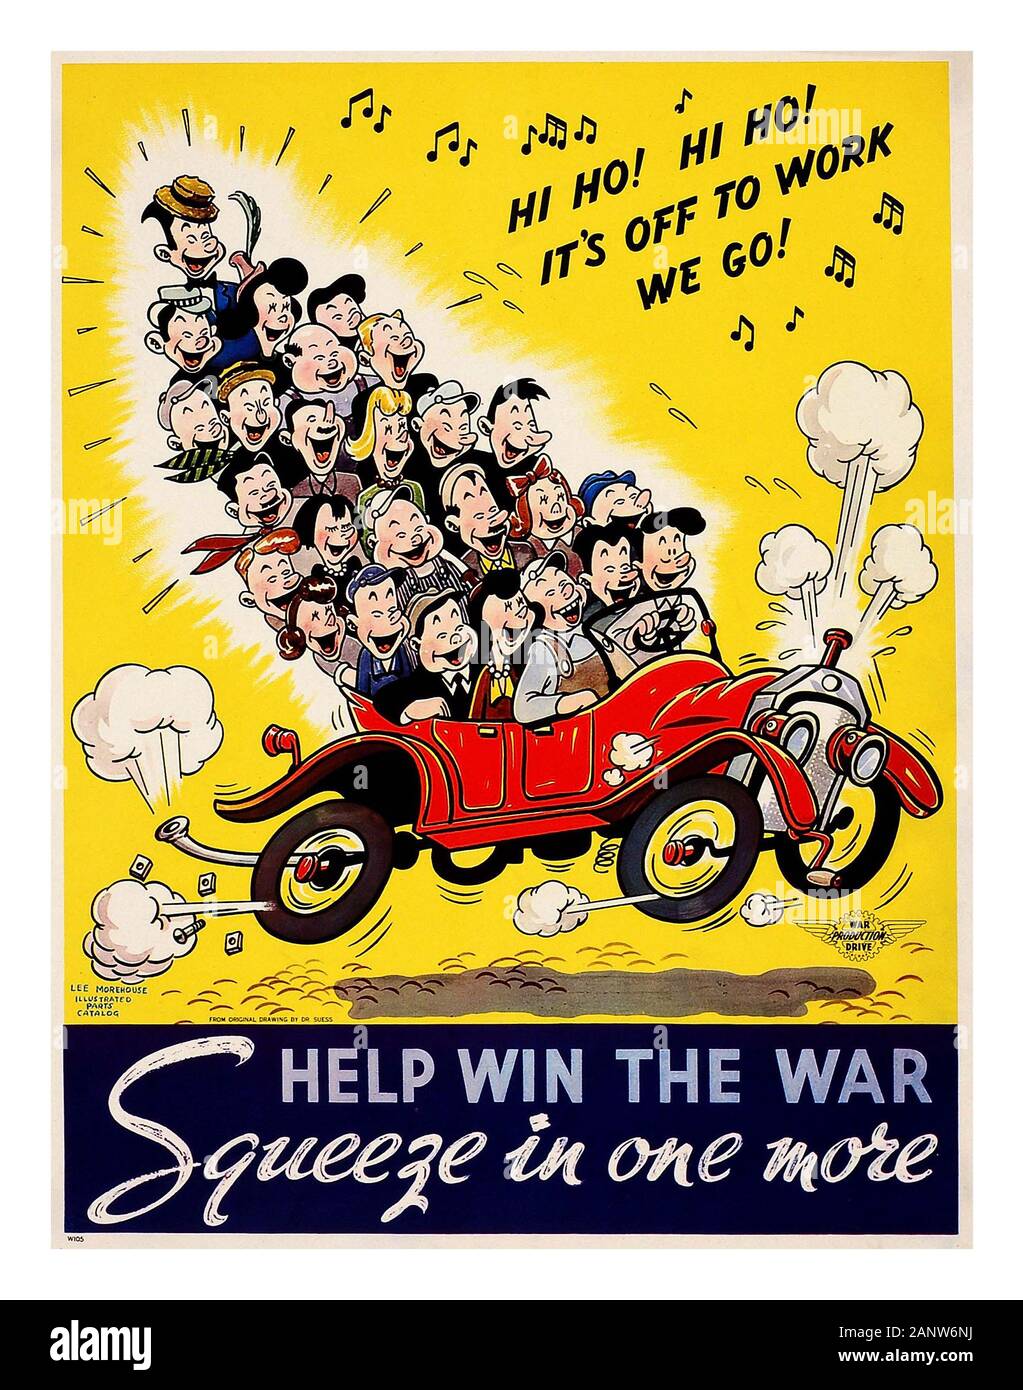 CAR SHARE WW2 Vintage American 1940's WW2 Propaganda Cartoon Poster for car  share 'Help win the war SQUEEZE IN ONE MORE' asking people to save fuel and share  car rides World War